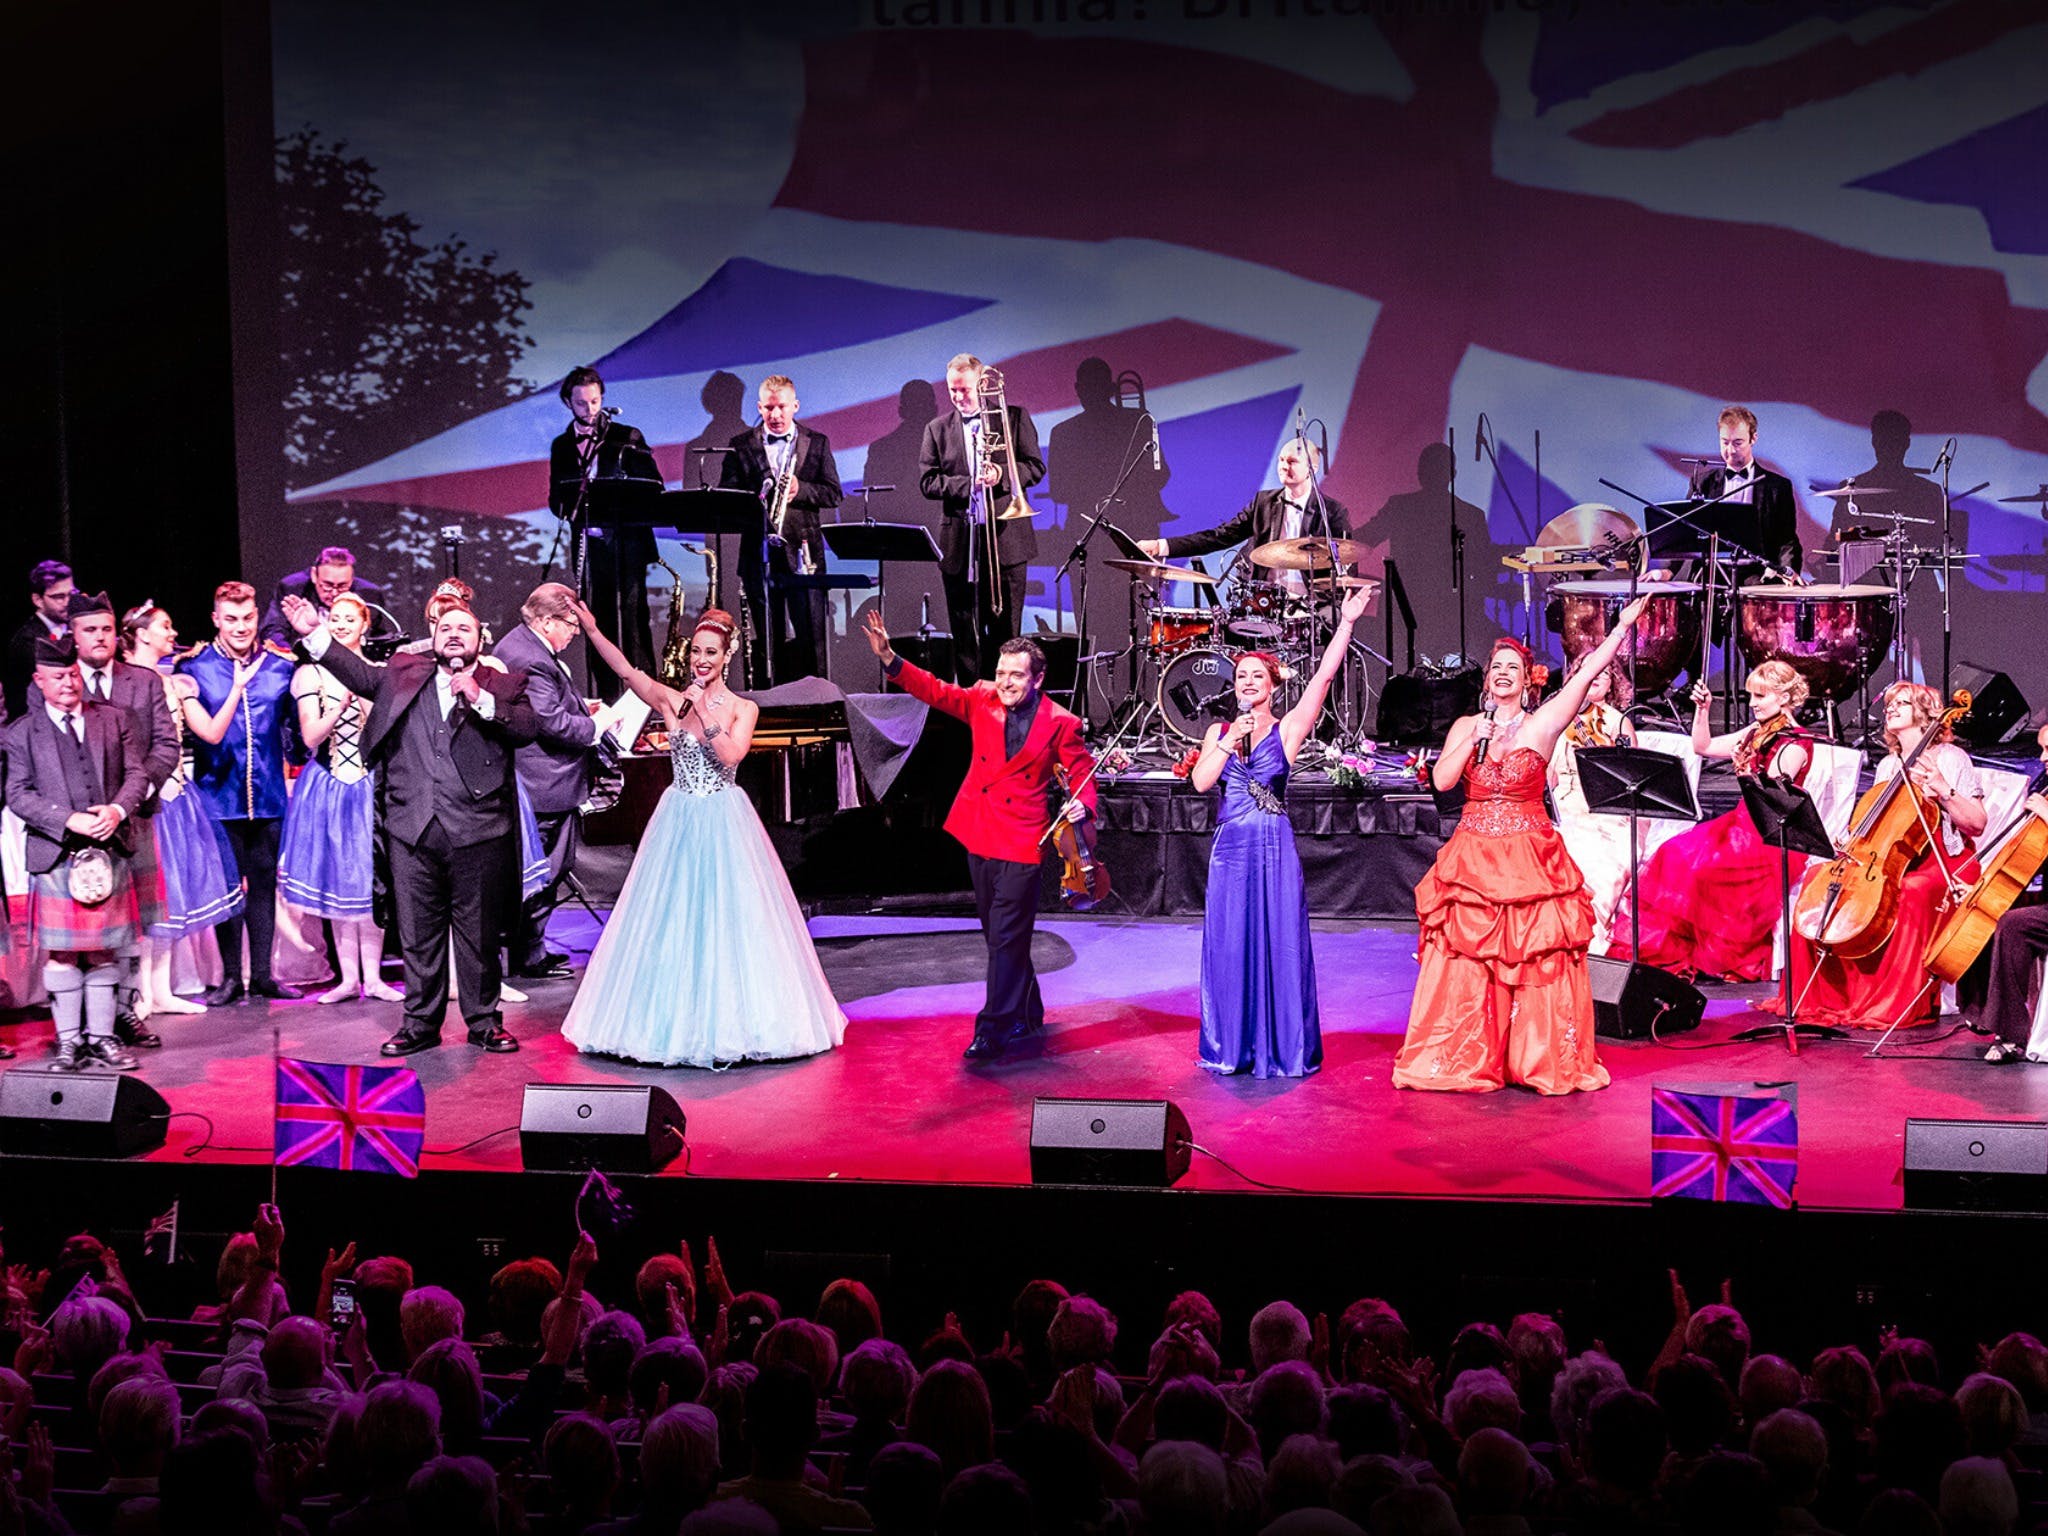 An Afternoon at the Proms - A Musical Spectacular - St Kilda Accommodation